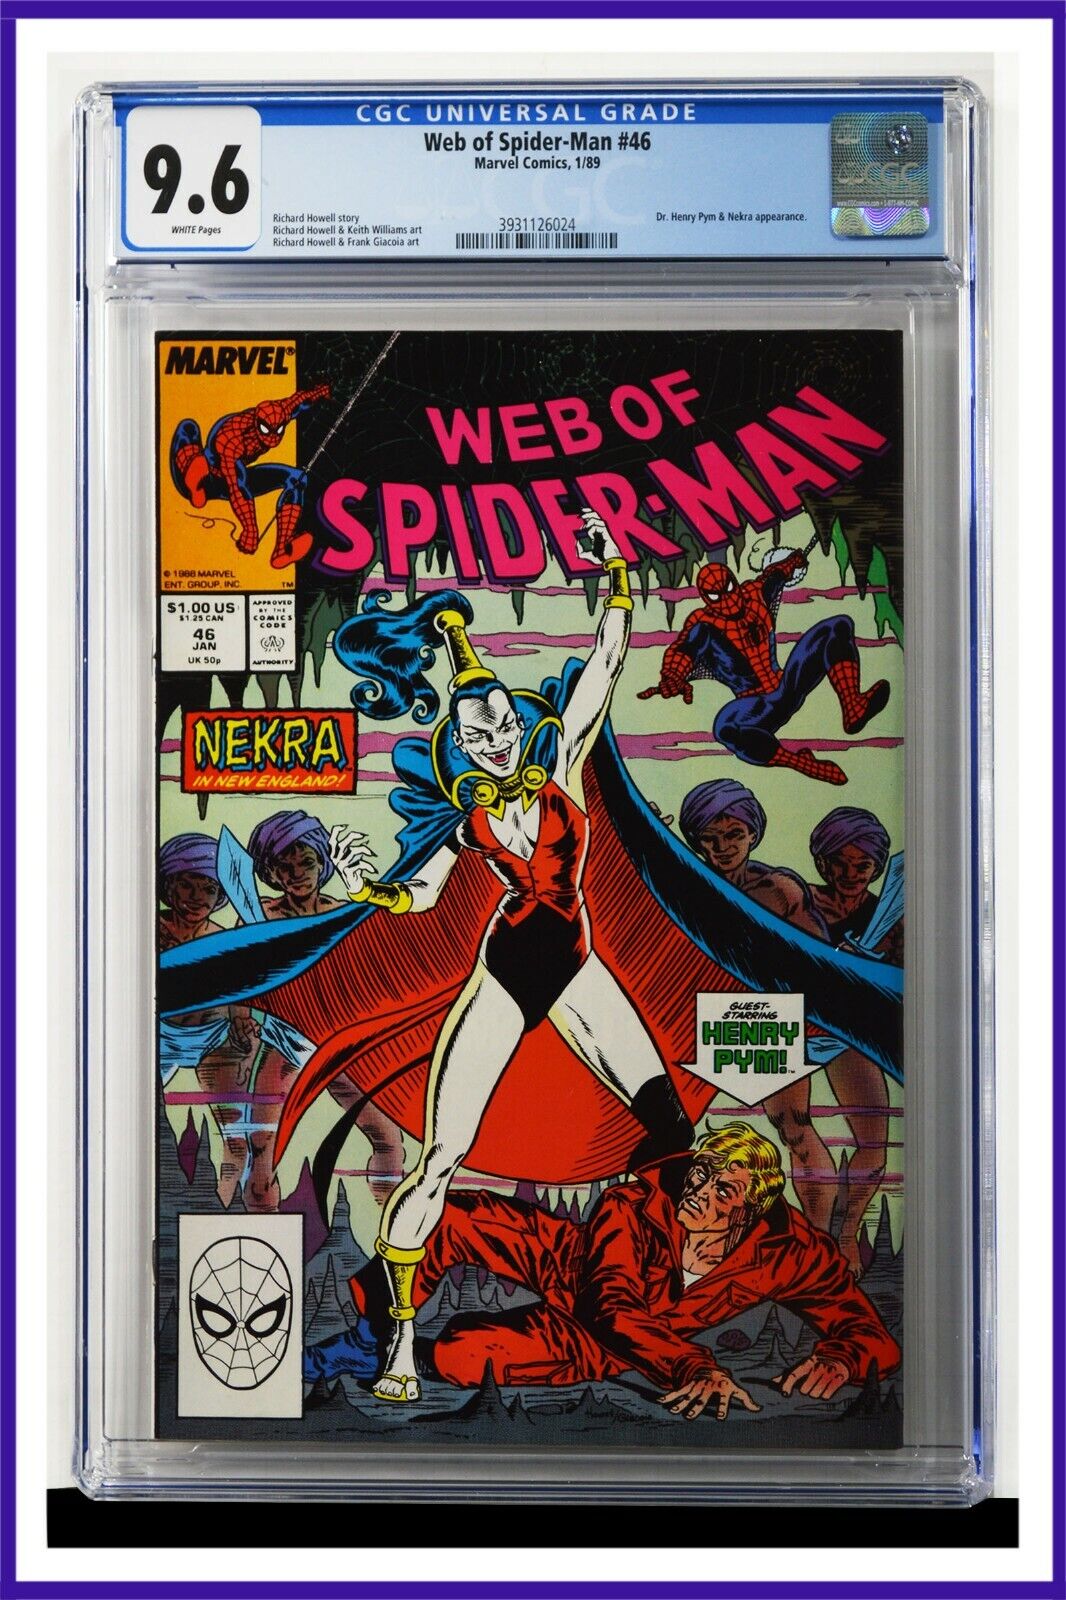 Web Of Spider-Man #46 CGC Graded 9.6 Marvel January 1989 White Pages Comic Book.